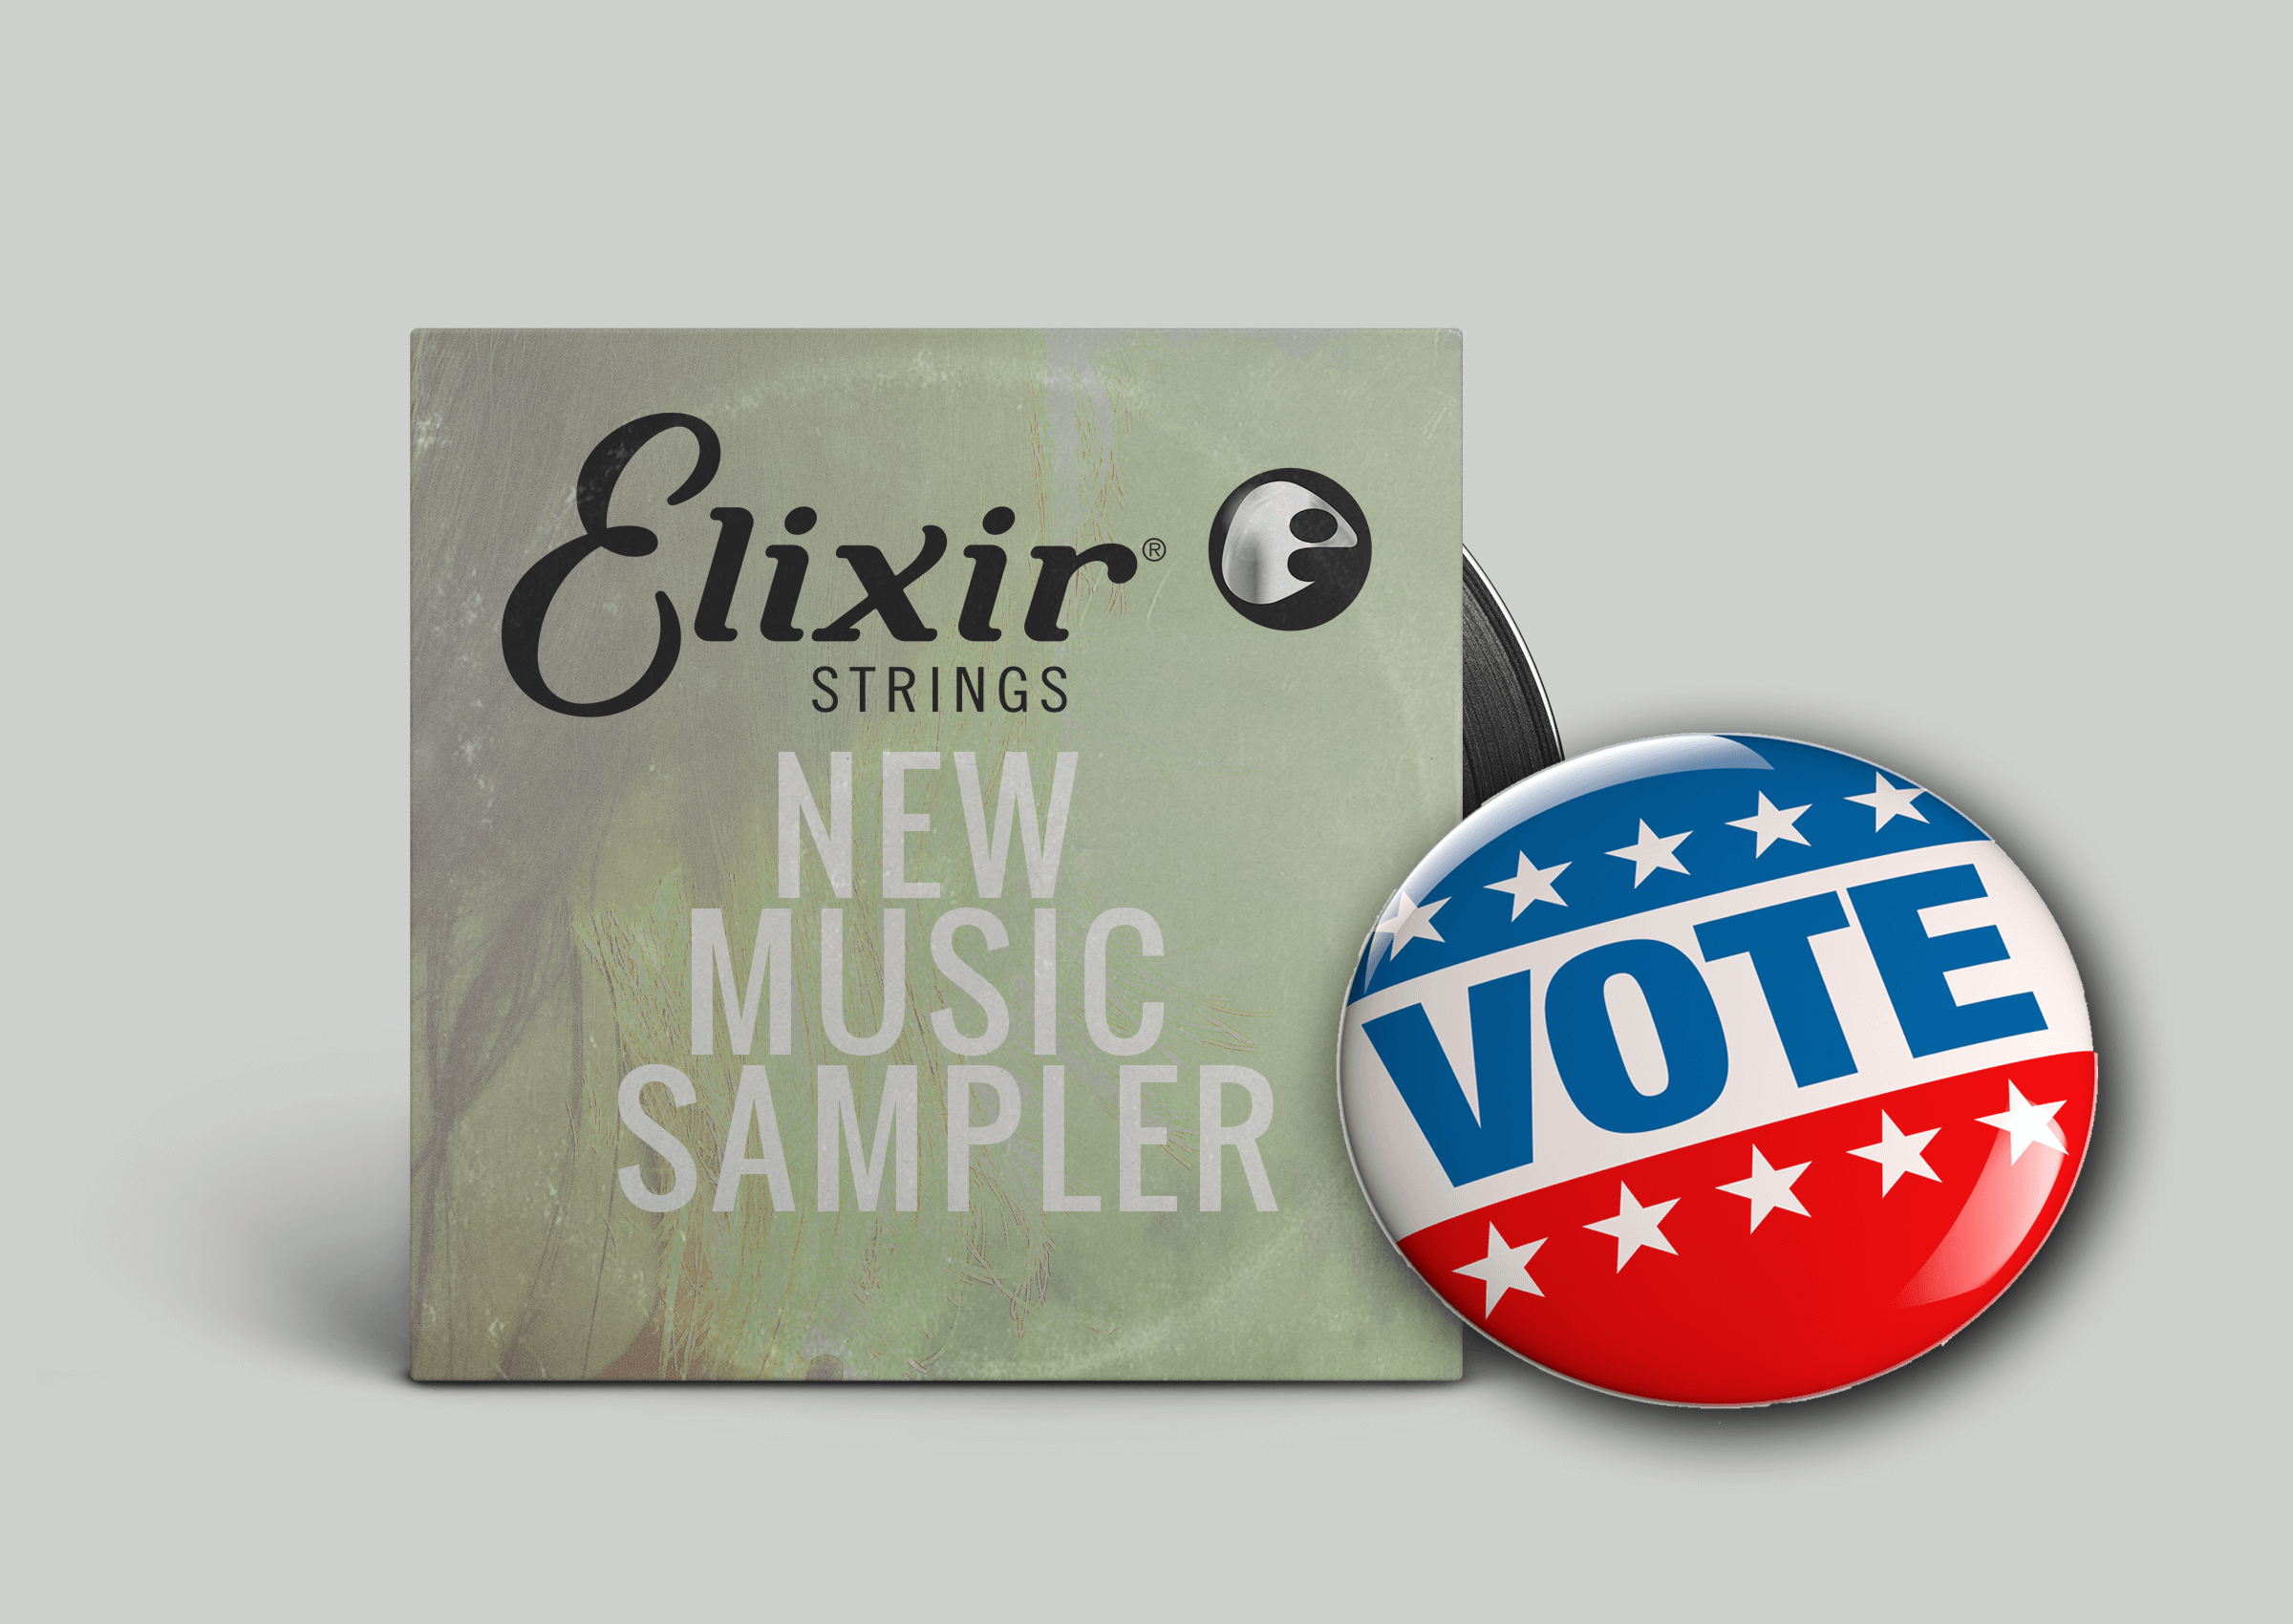 VOTE NOW for our Vinyl Sampler FINALISTS